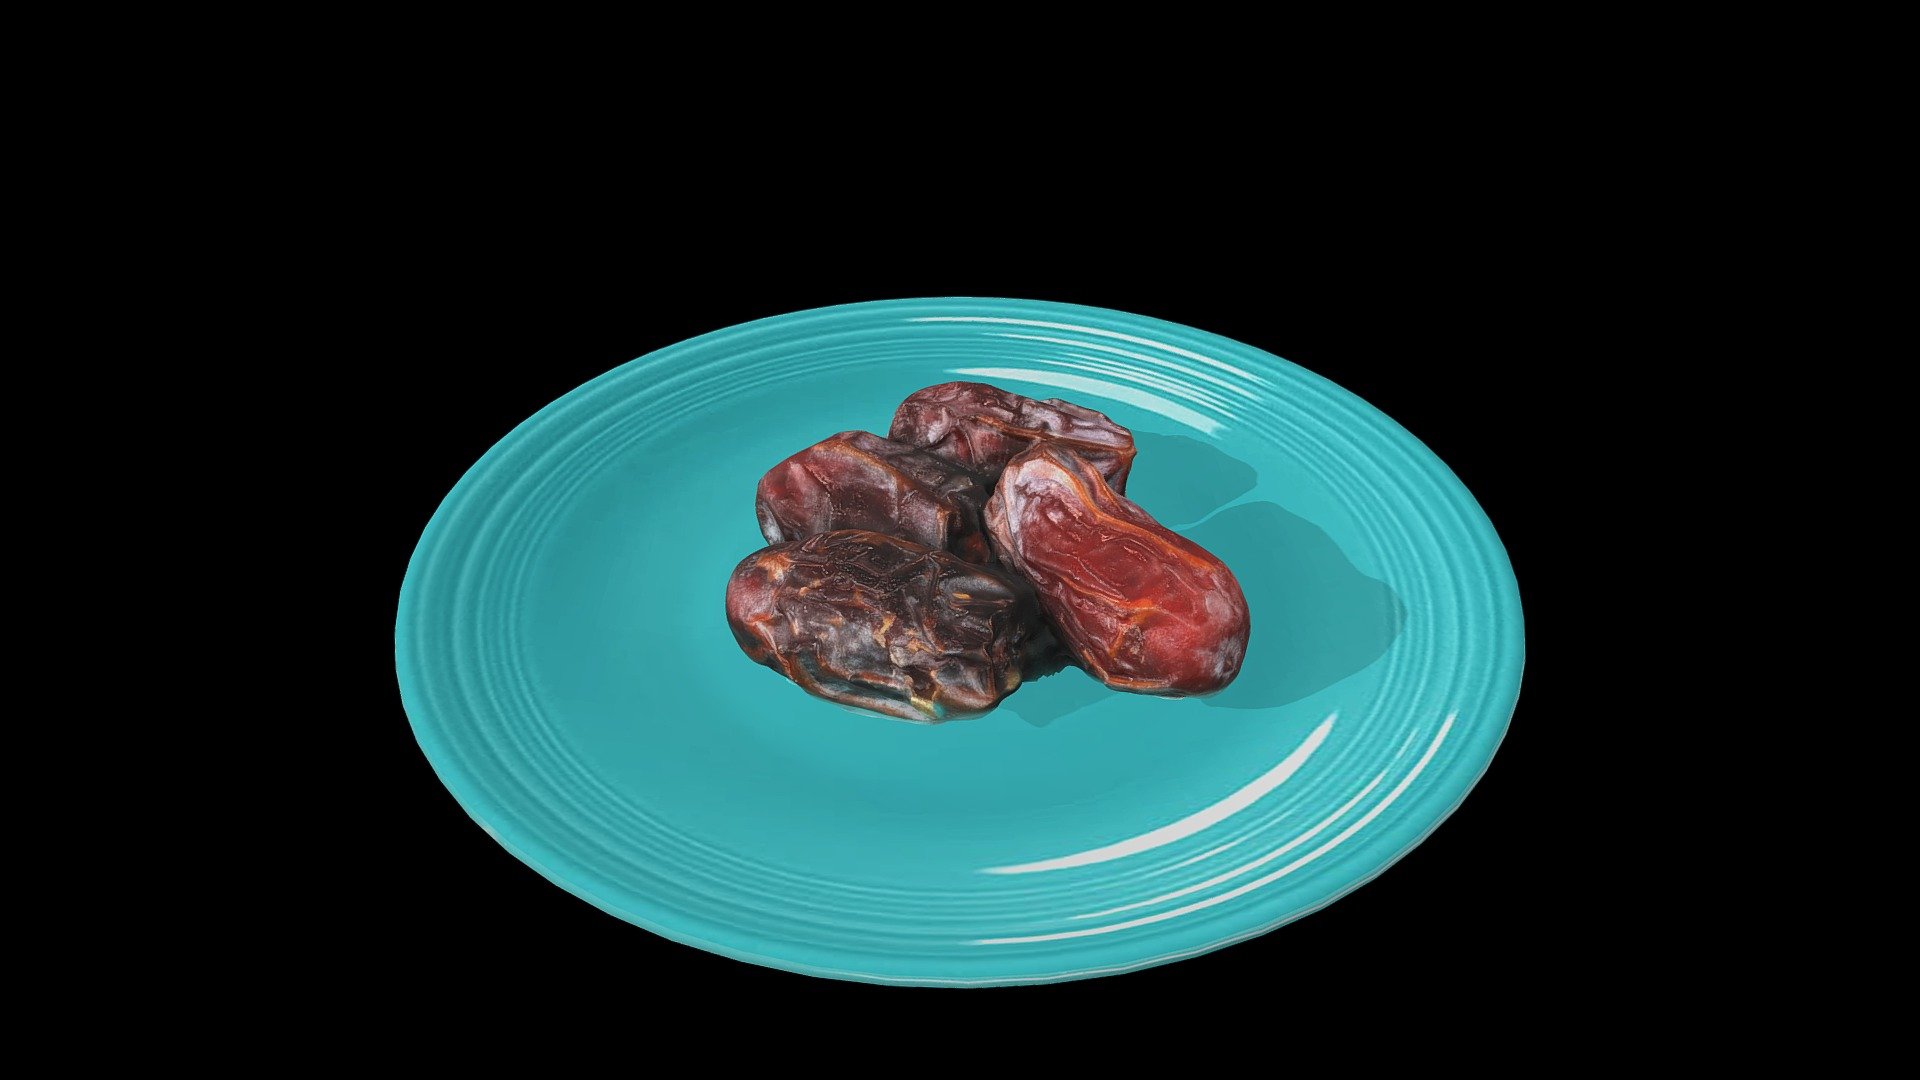 Four medjool dates on a Fiestaware plate.

Created from 130 photographs (Canon EOS Rebel T7i).  Fiestaware plate created in Blender 2.8 3d model